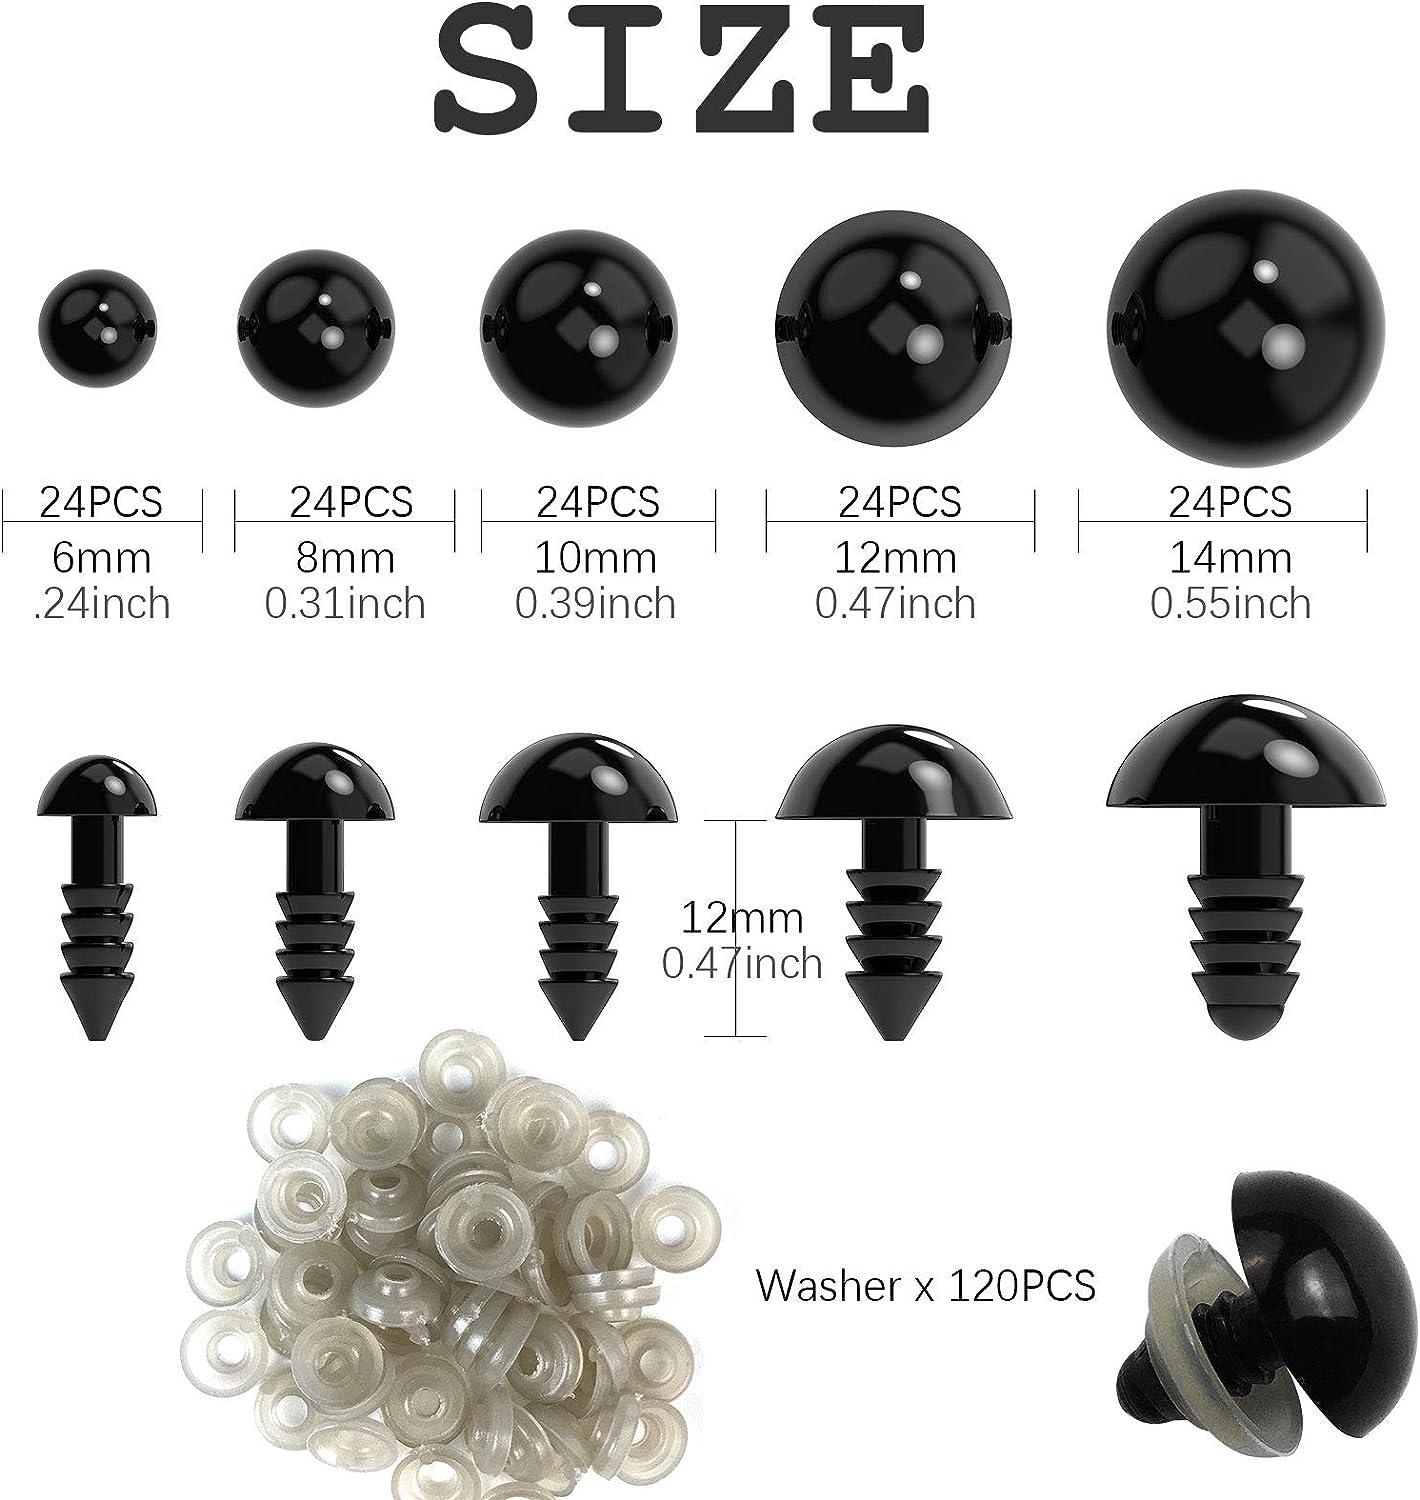 Plastic Safety Eyes for Amigurumi 240PCS 6mm - 14mm Black Solid Craft Doll  Eyes with Washers for Crafts Crochet Toy and Stuffed Animals